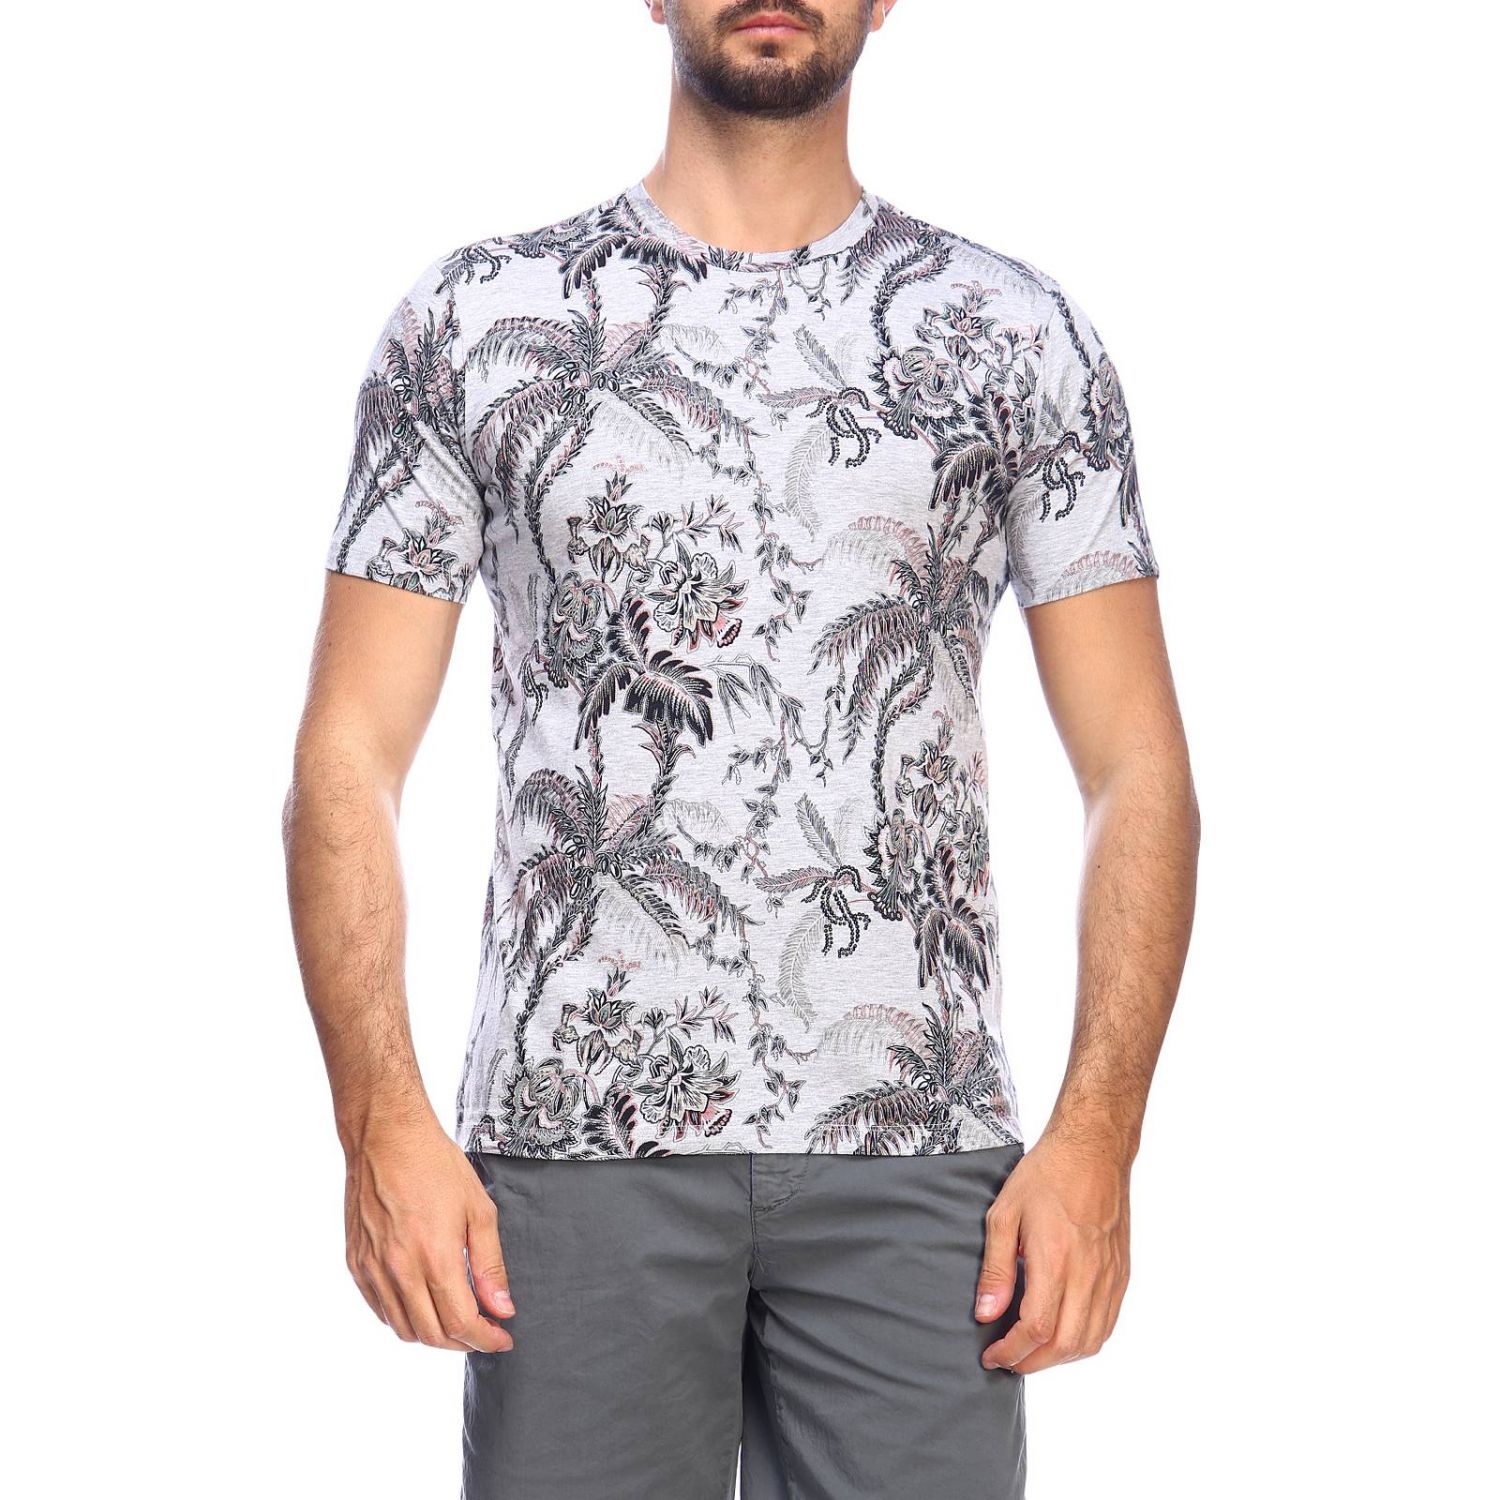 Etro Outlet: t-shirt for man - Grey | Etro t-shirt 1Y020 4170 online on ...